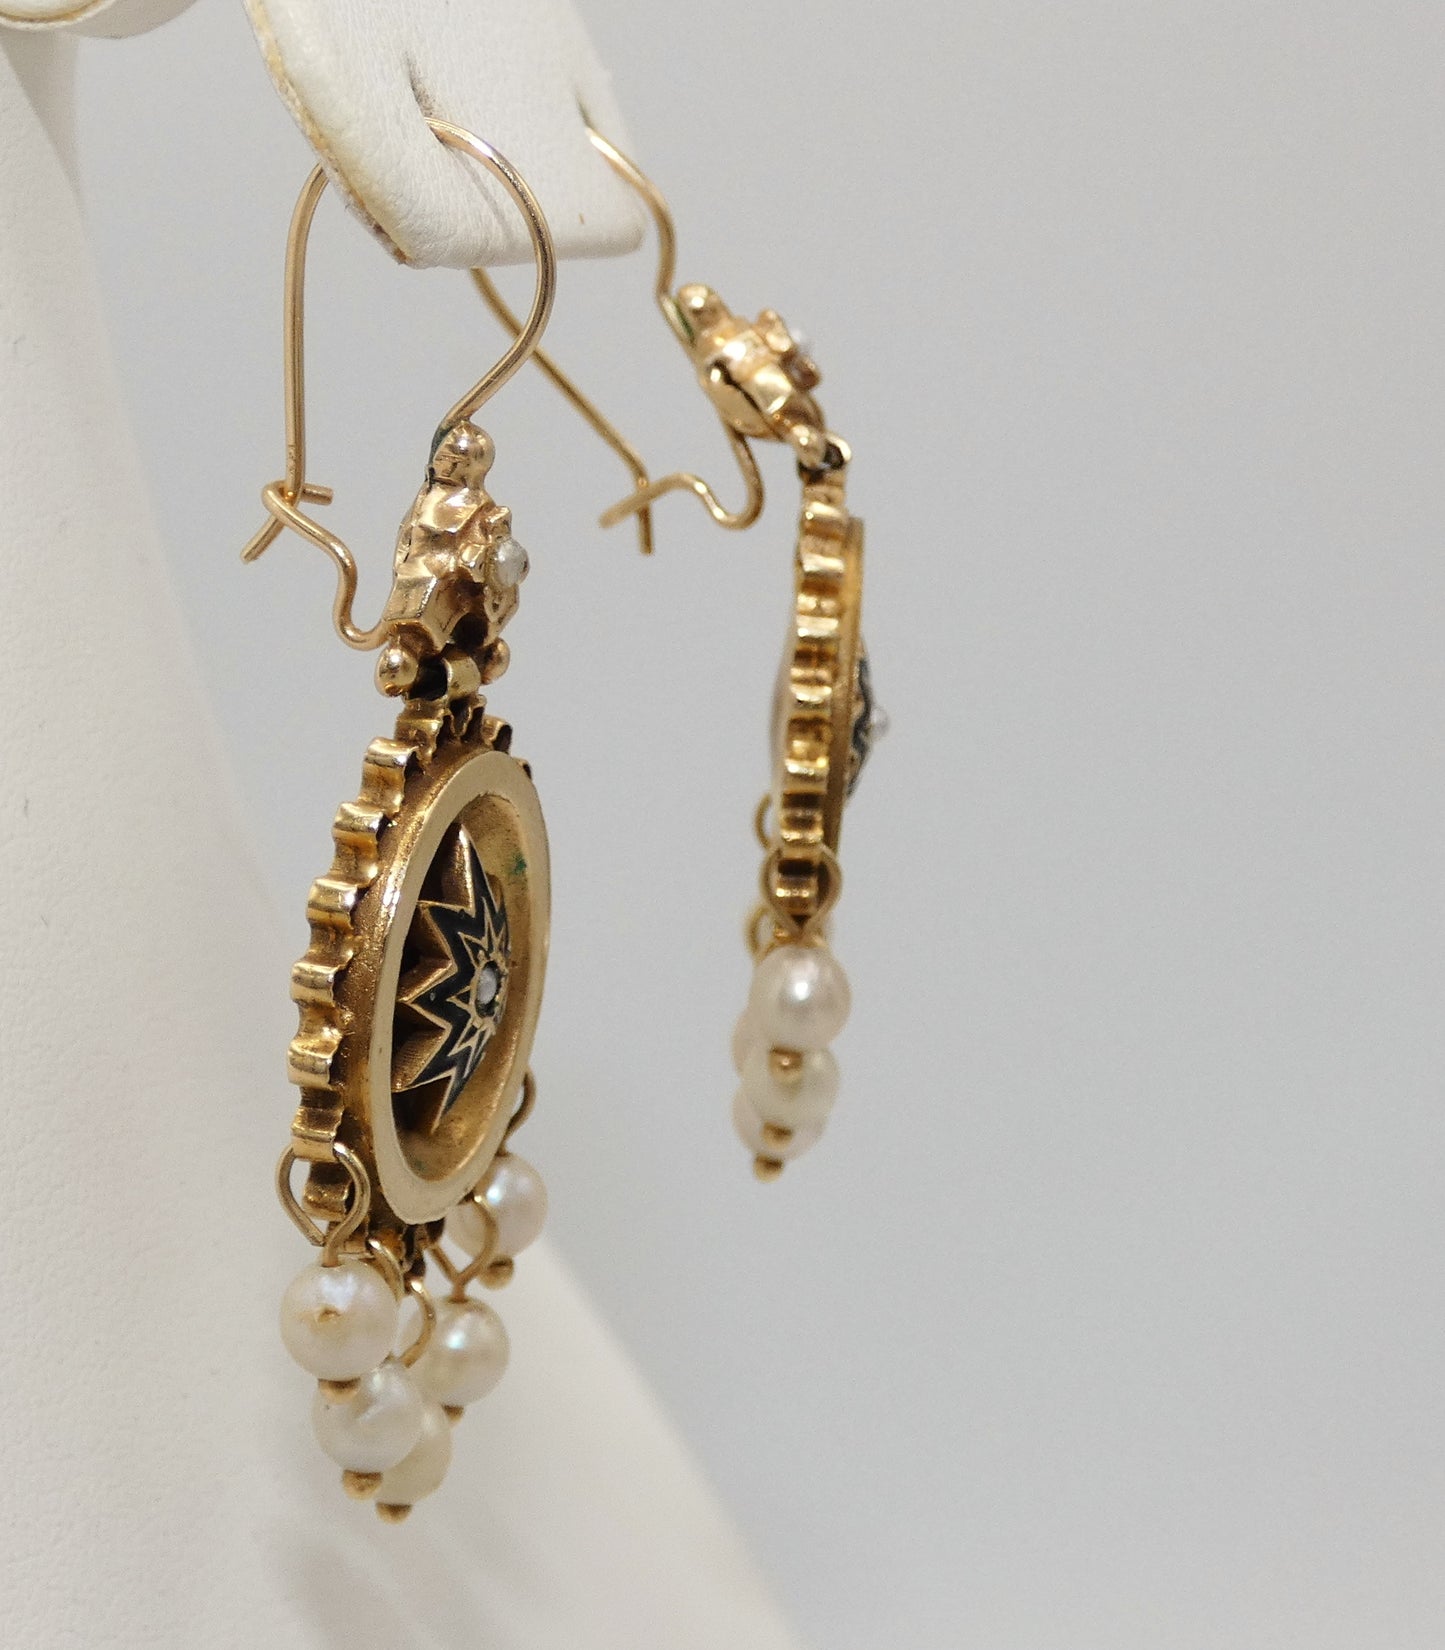 14K Gold Star Earrings with Pearls